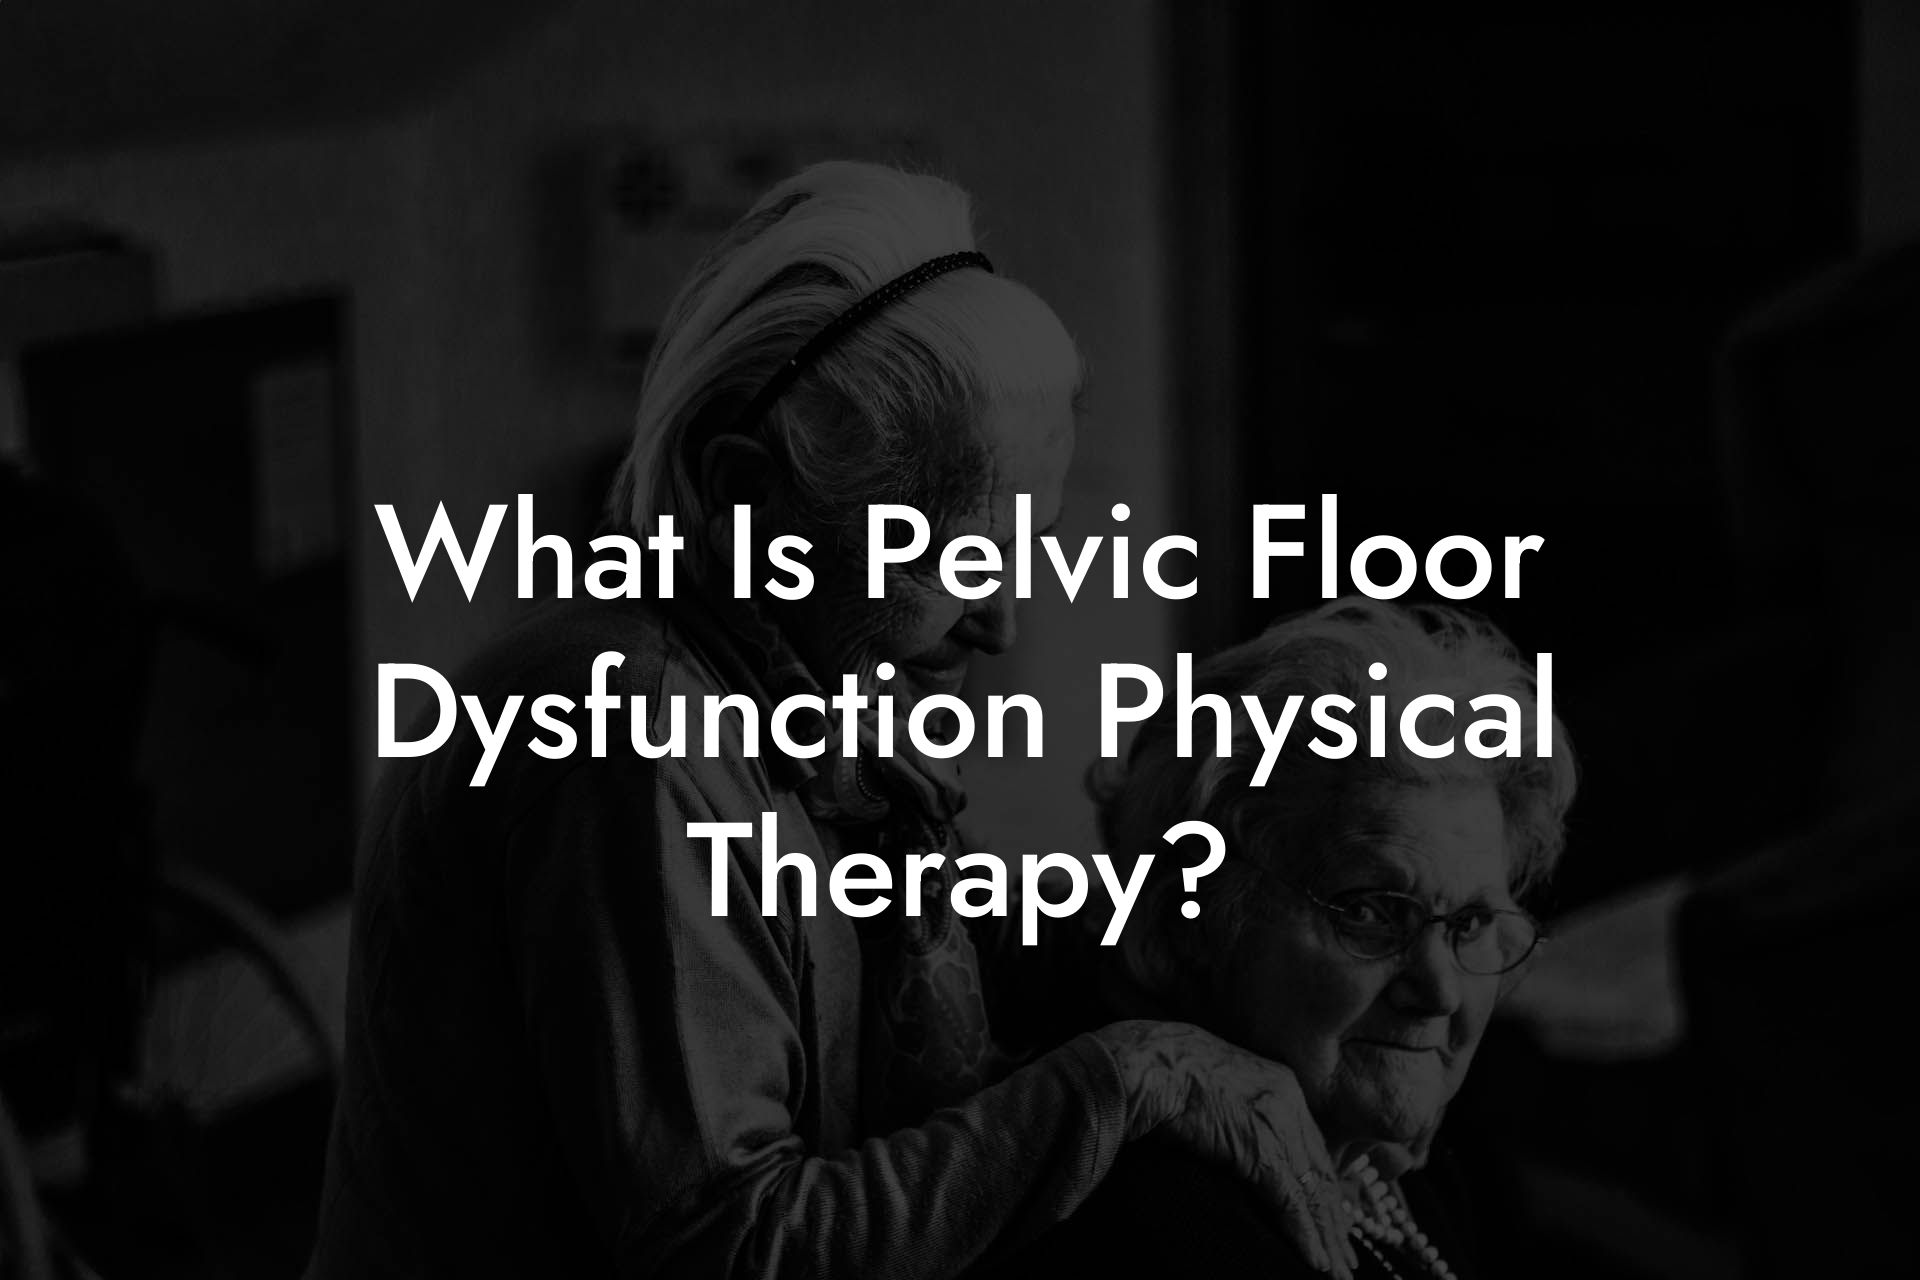 What Is Pelvic Floor Dysfunction Physical Therapy?